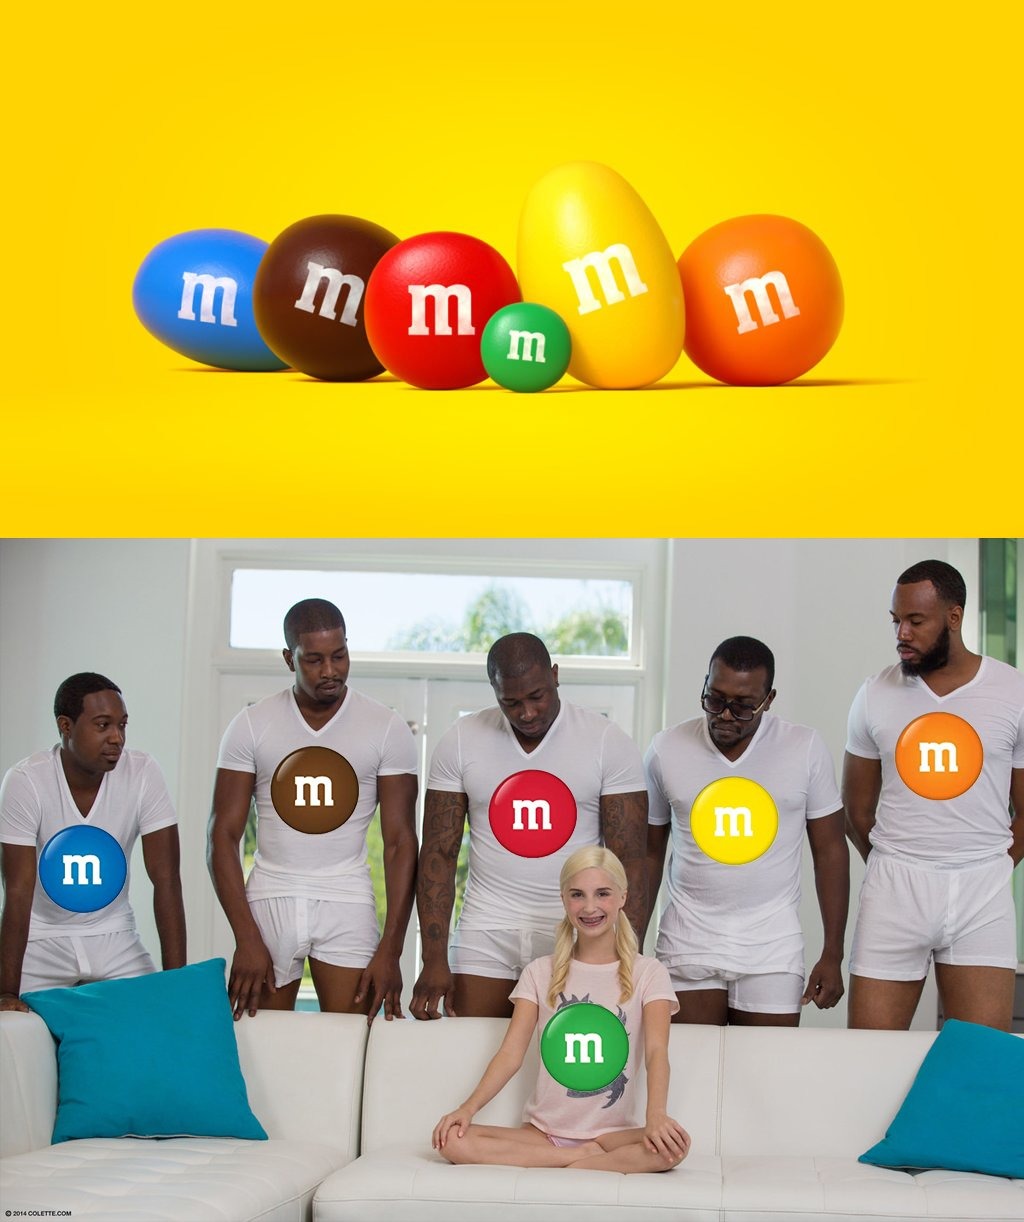 The VP of M&Ms explains that they're making the M&Ms characters more inclusive in order to "start a movement." The girl M&Ms will be focused on "empowerment" while the orange M&M will “embrace his true self" - meme